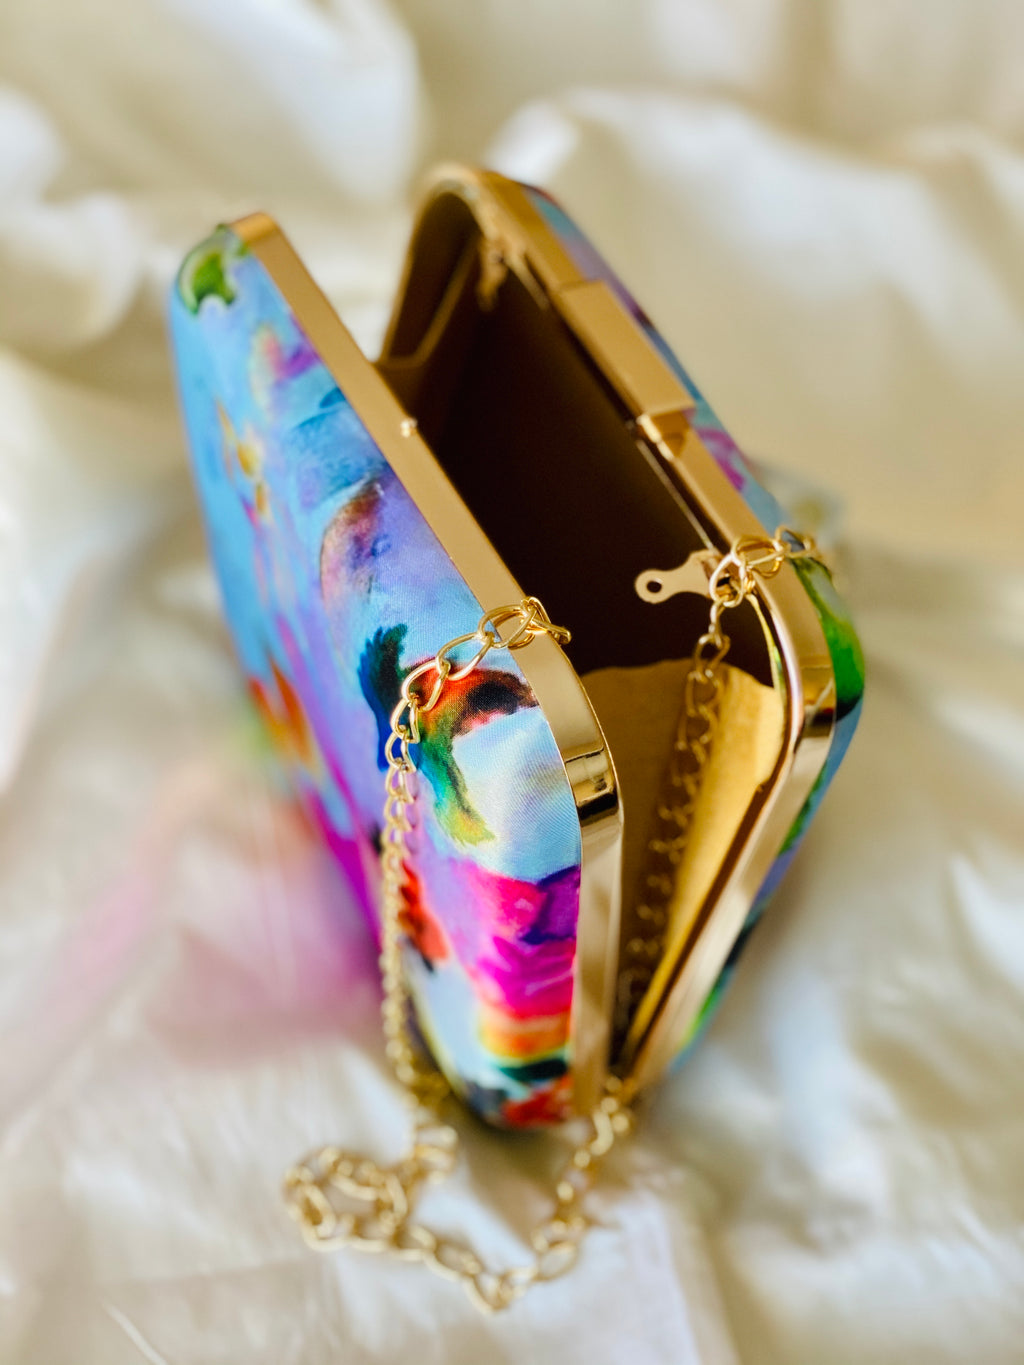 Colorful floral clutch